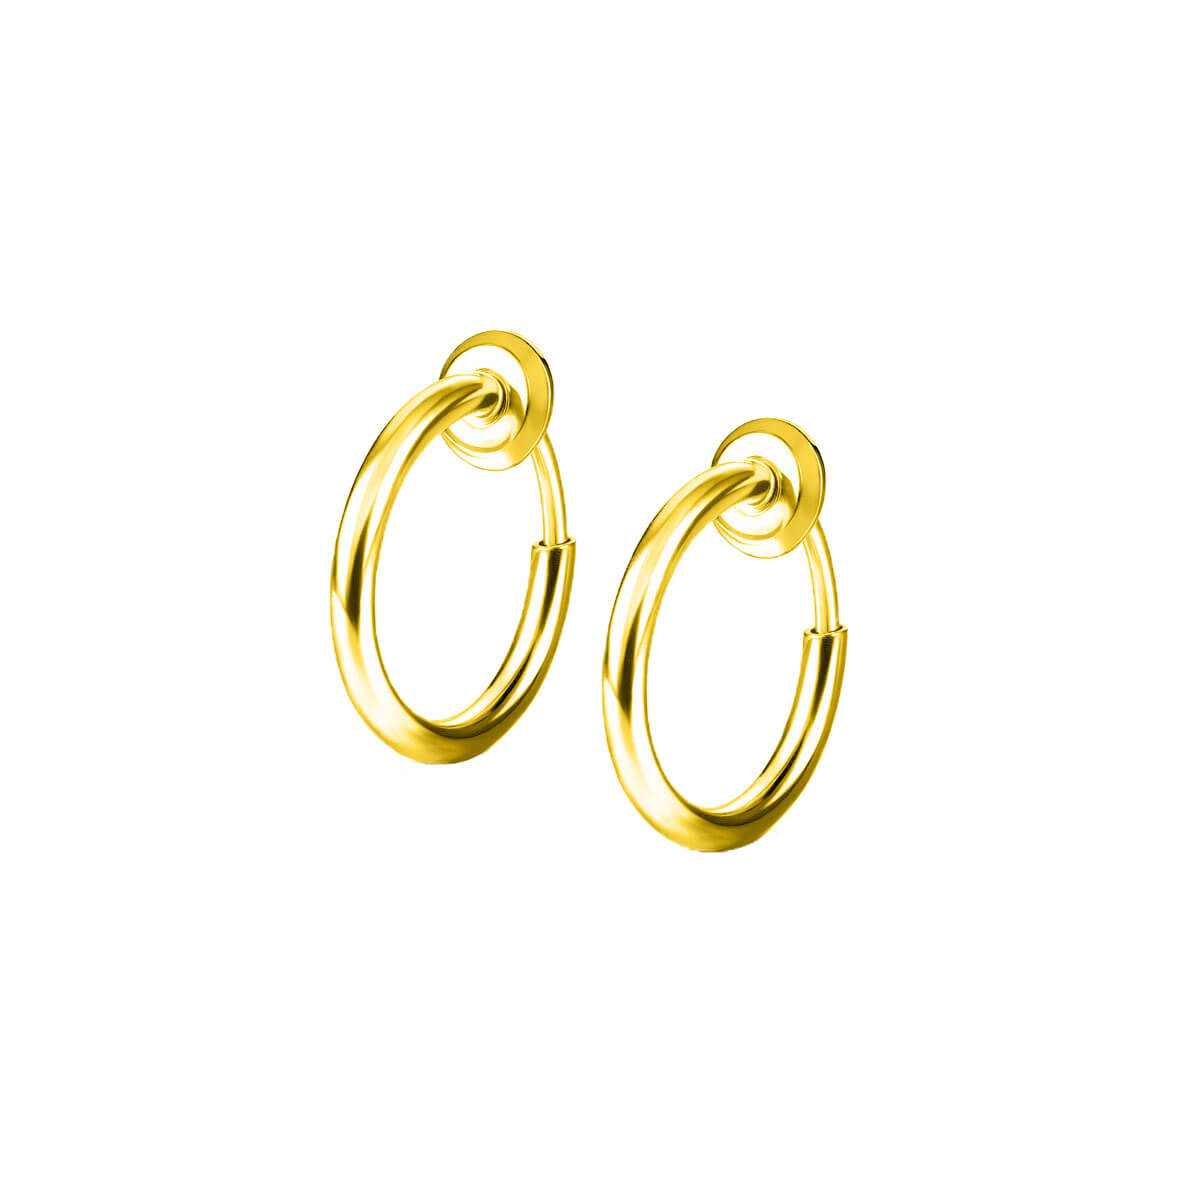 Spring-loaded earring with fine ring 10mm 2pcs (Steel 316L)